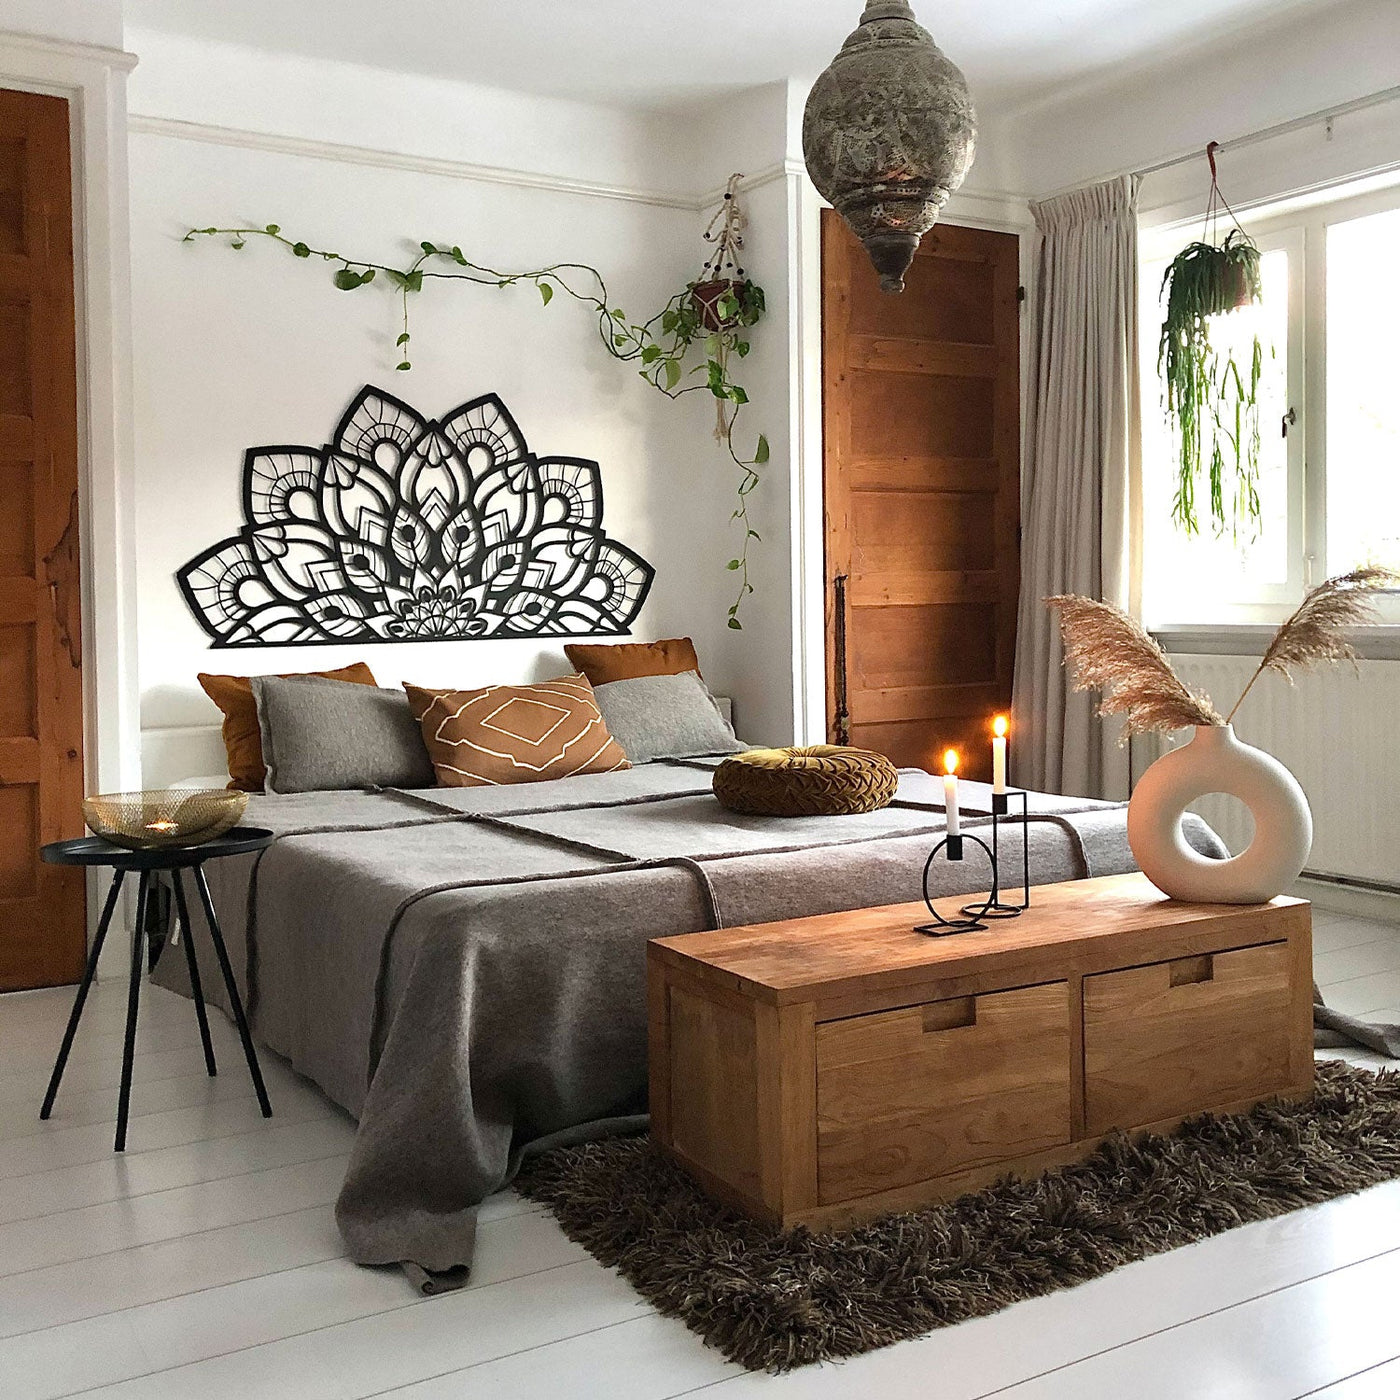 Large Metal Wall Decoration for above the bed